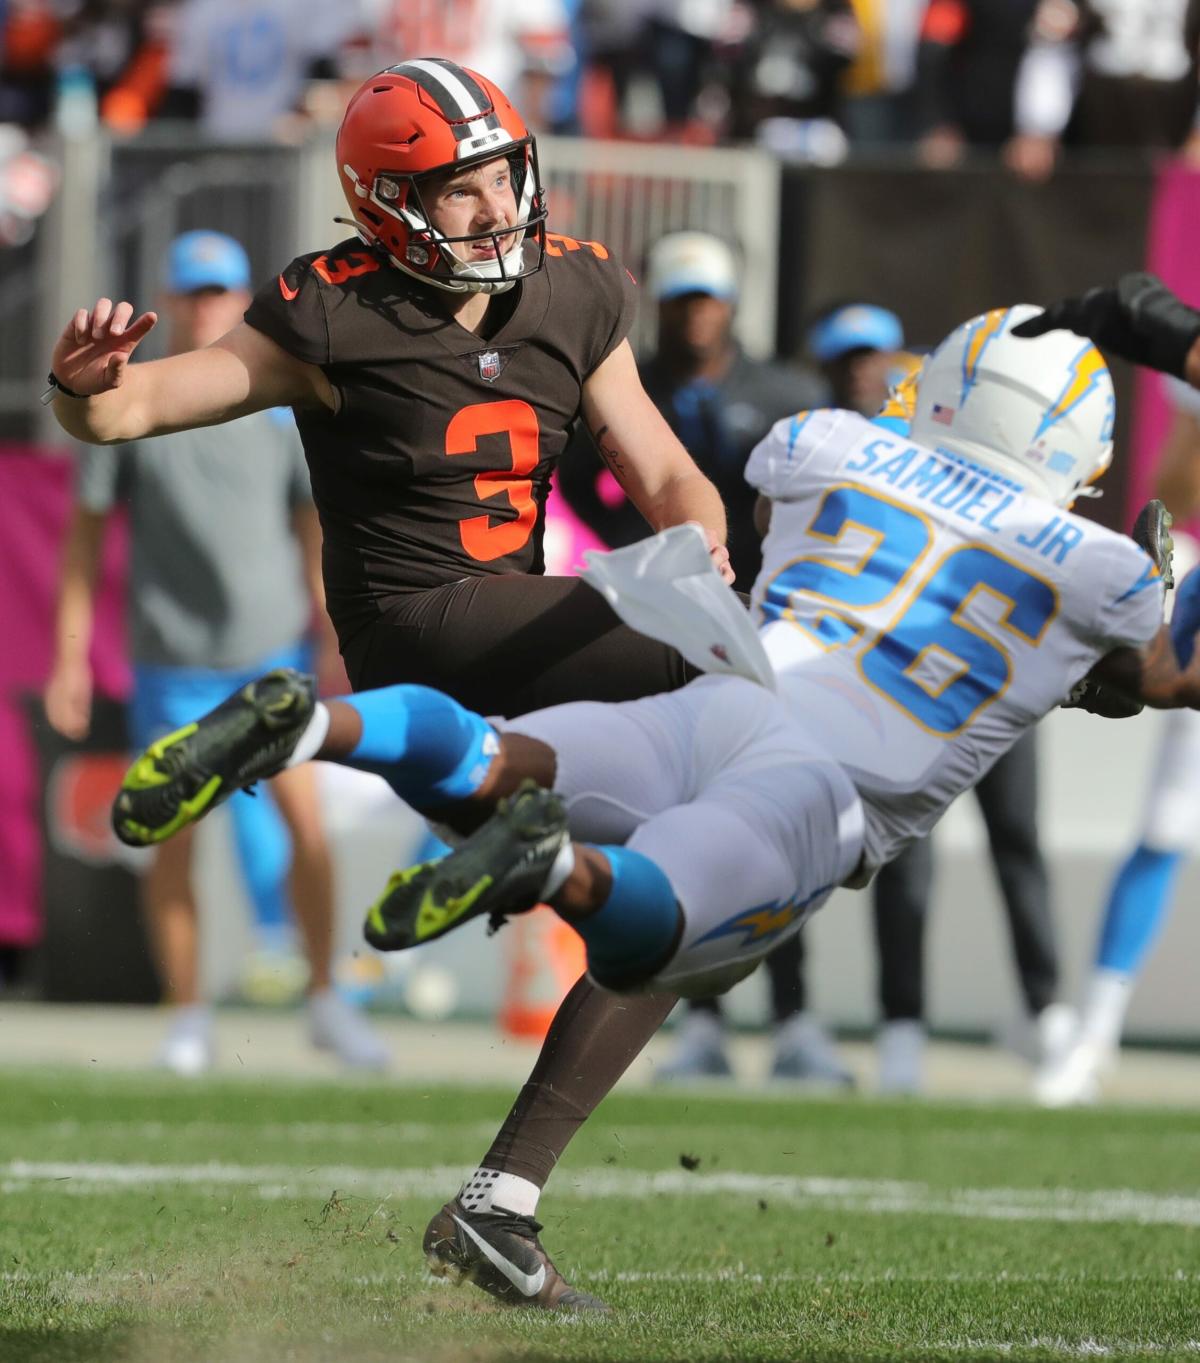 Cade York rebounds from bad week, puts Browns on the board